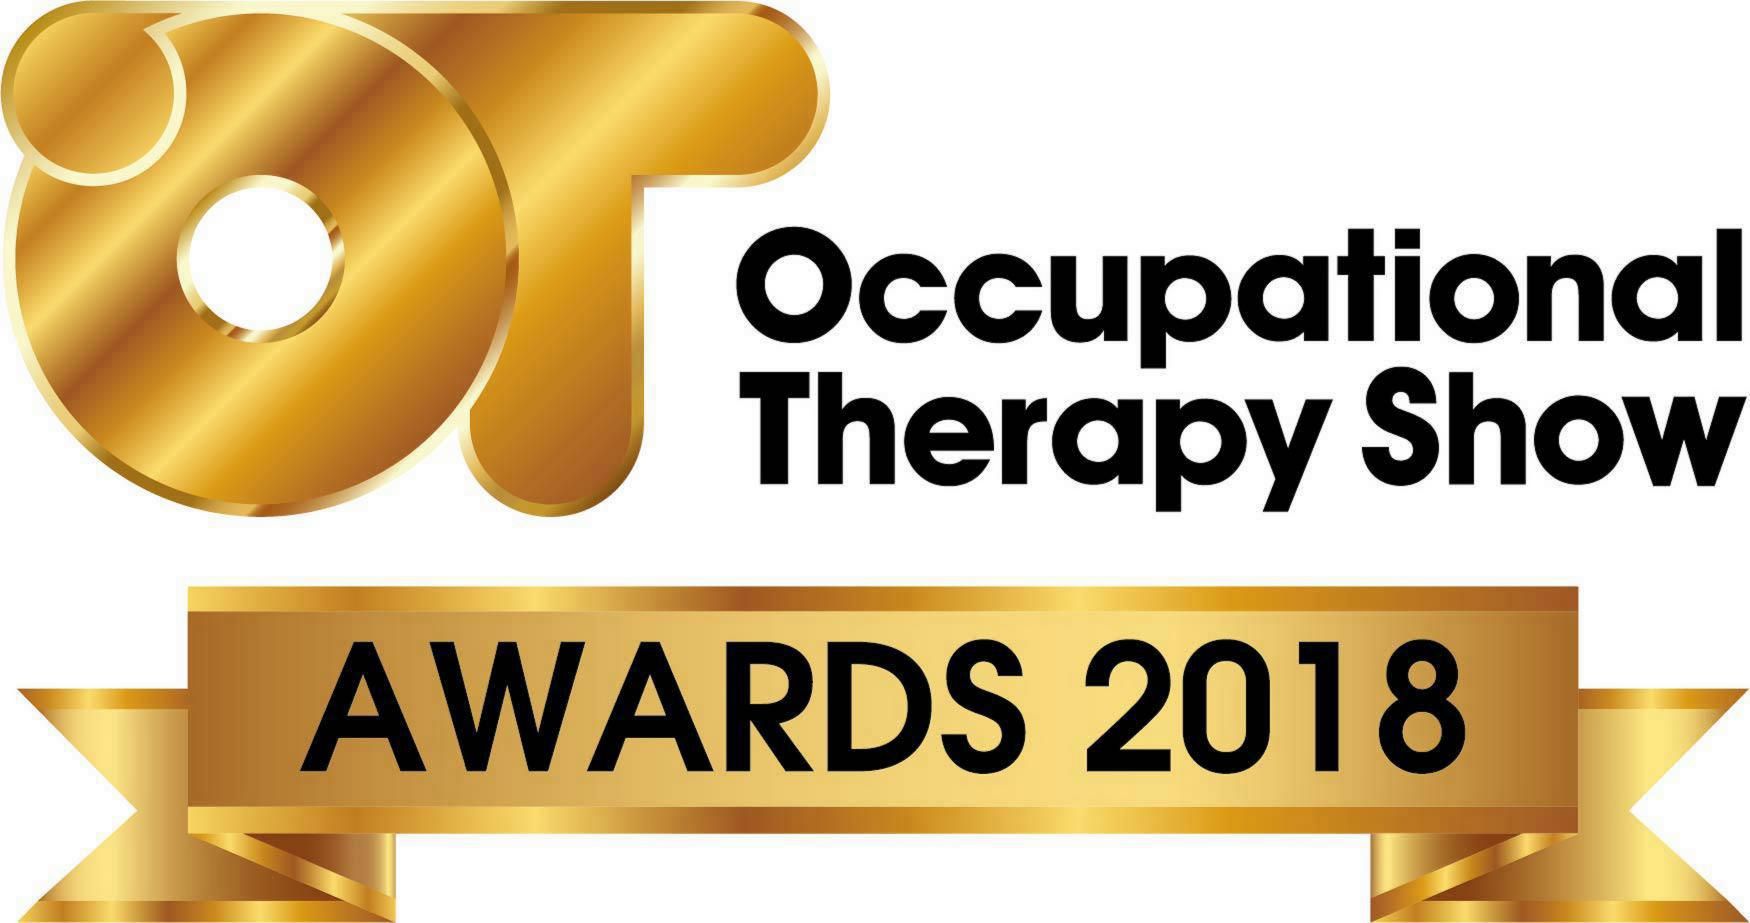 The Occupational Therapy Show Awards. And the winners are....